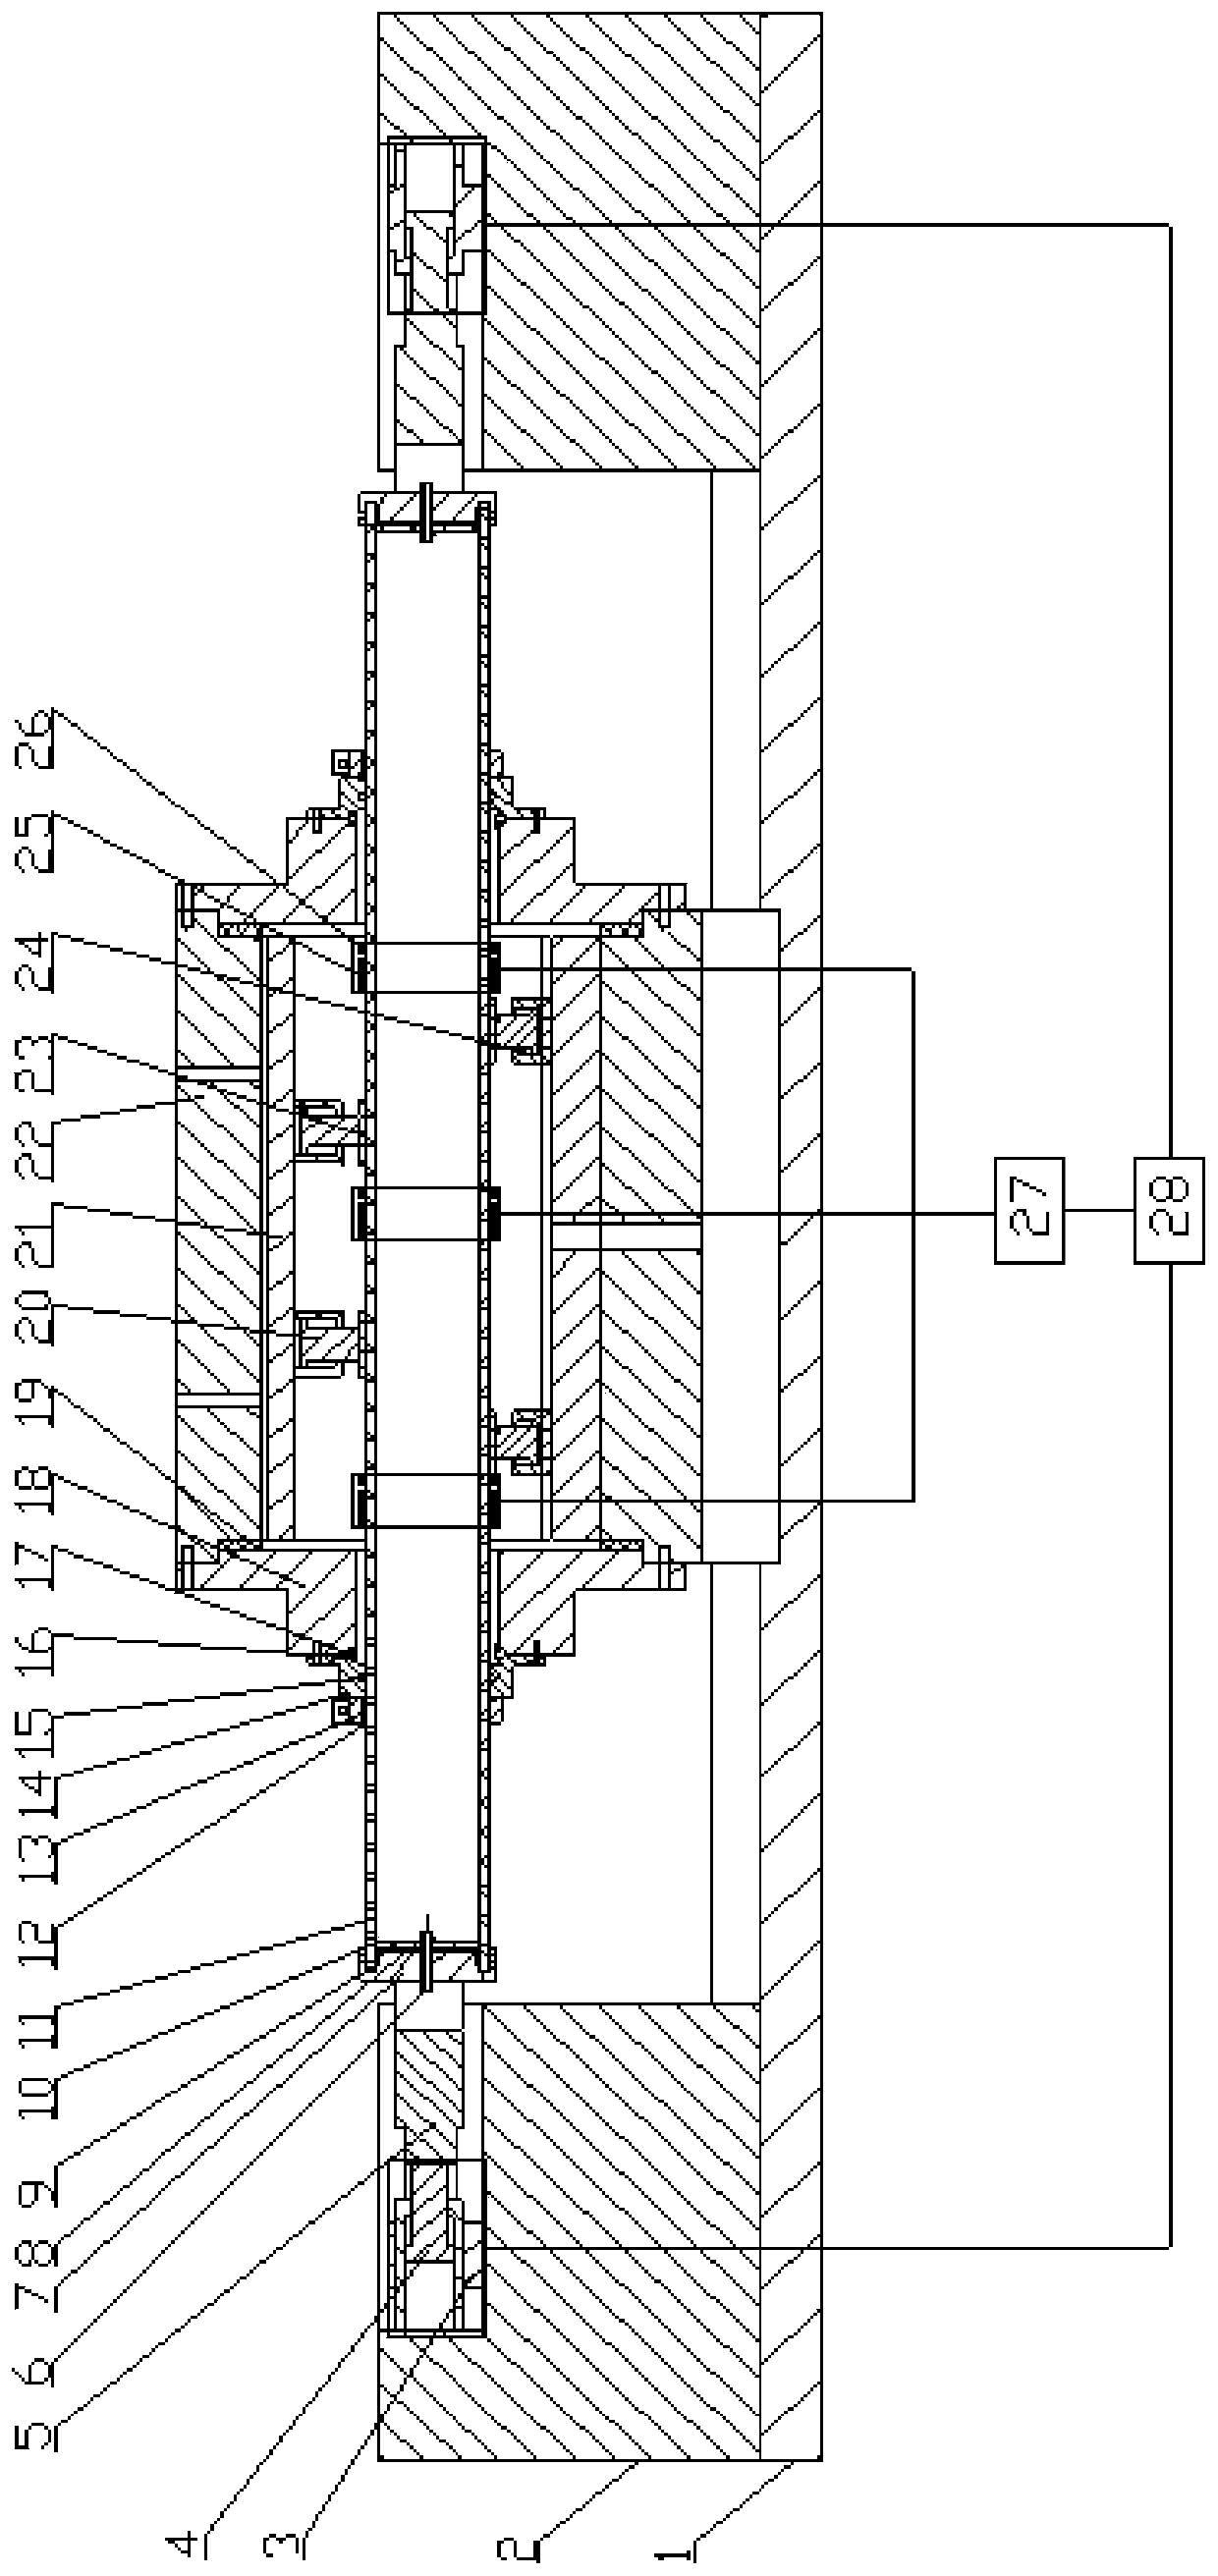 An experimental device for comprehensive testing of mechanical properties of marine pipelines